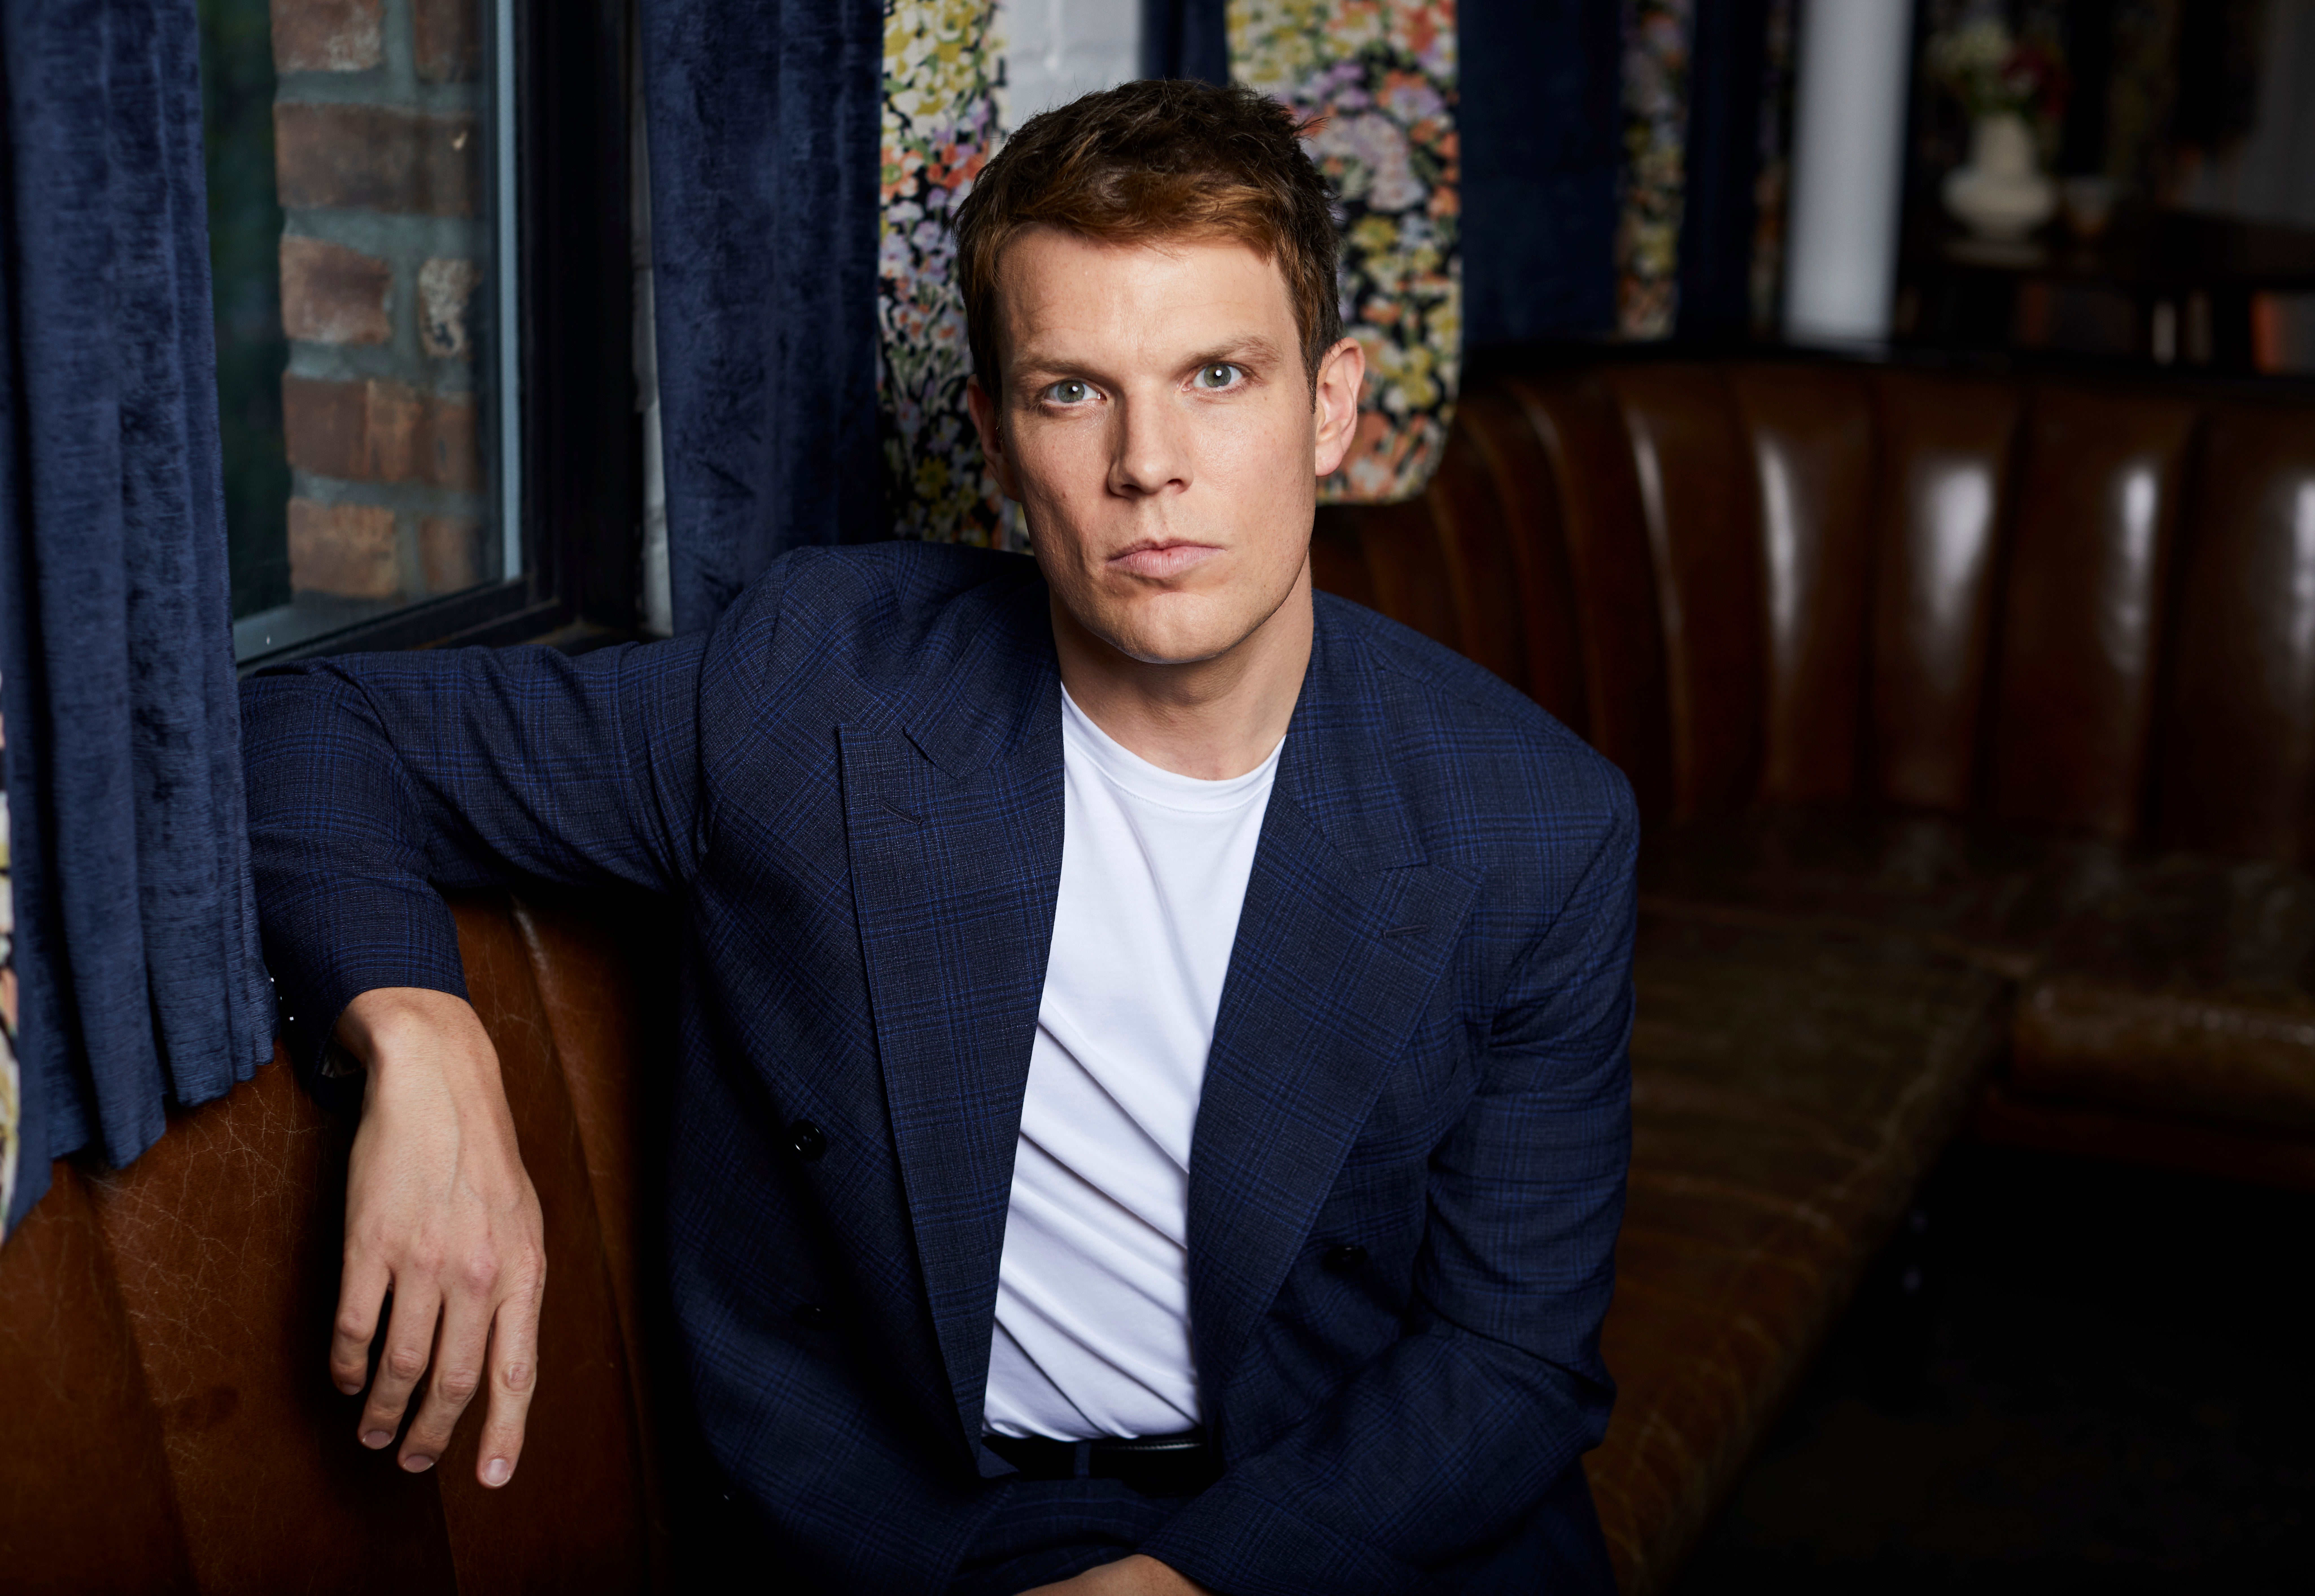 The Office star Jake Lacy From nice guy to the man viewers hate in A Friend of the Family The Independent